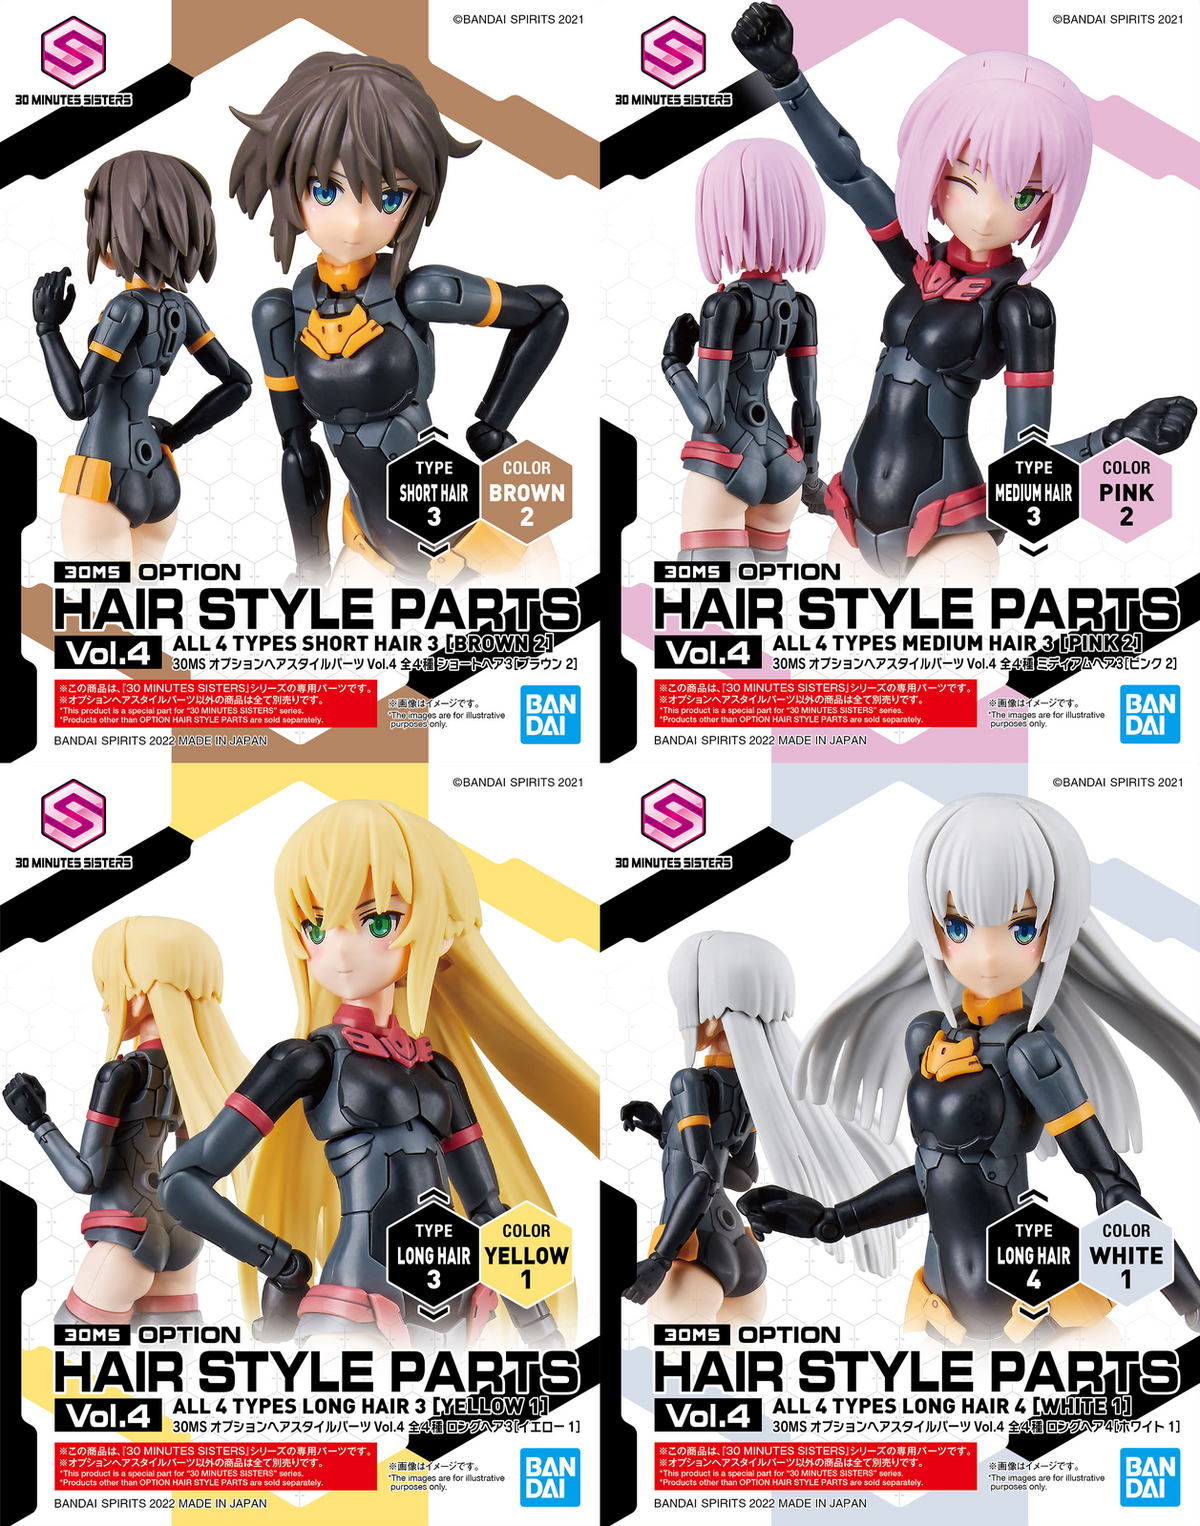 30MS : Option Hairstyle Parts Vol 4